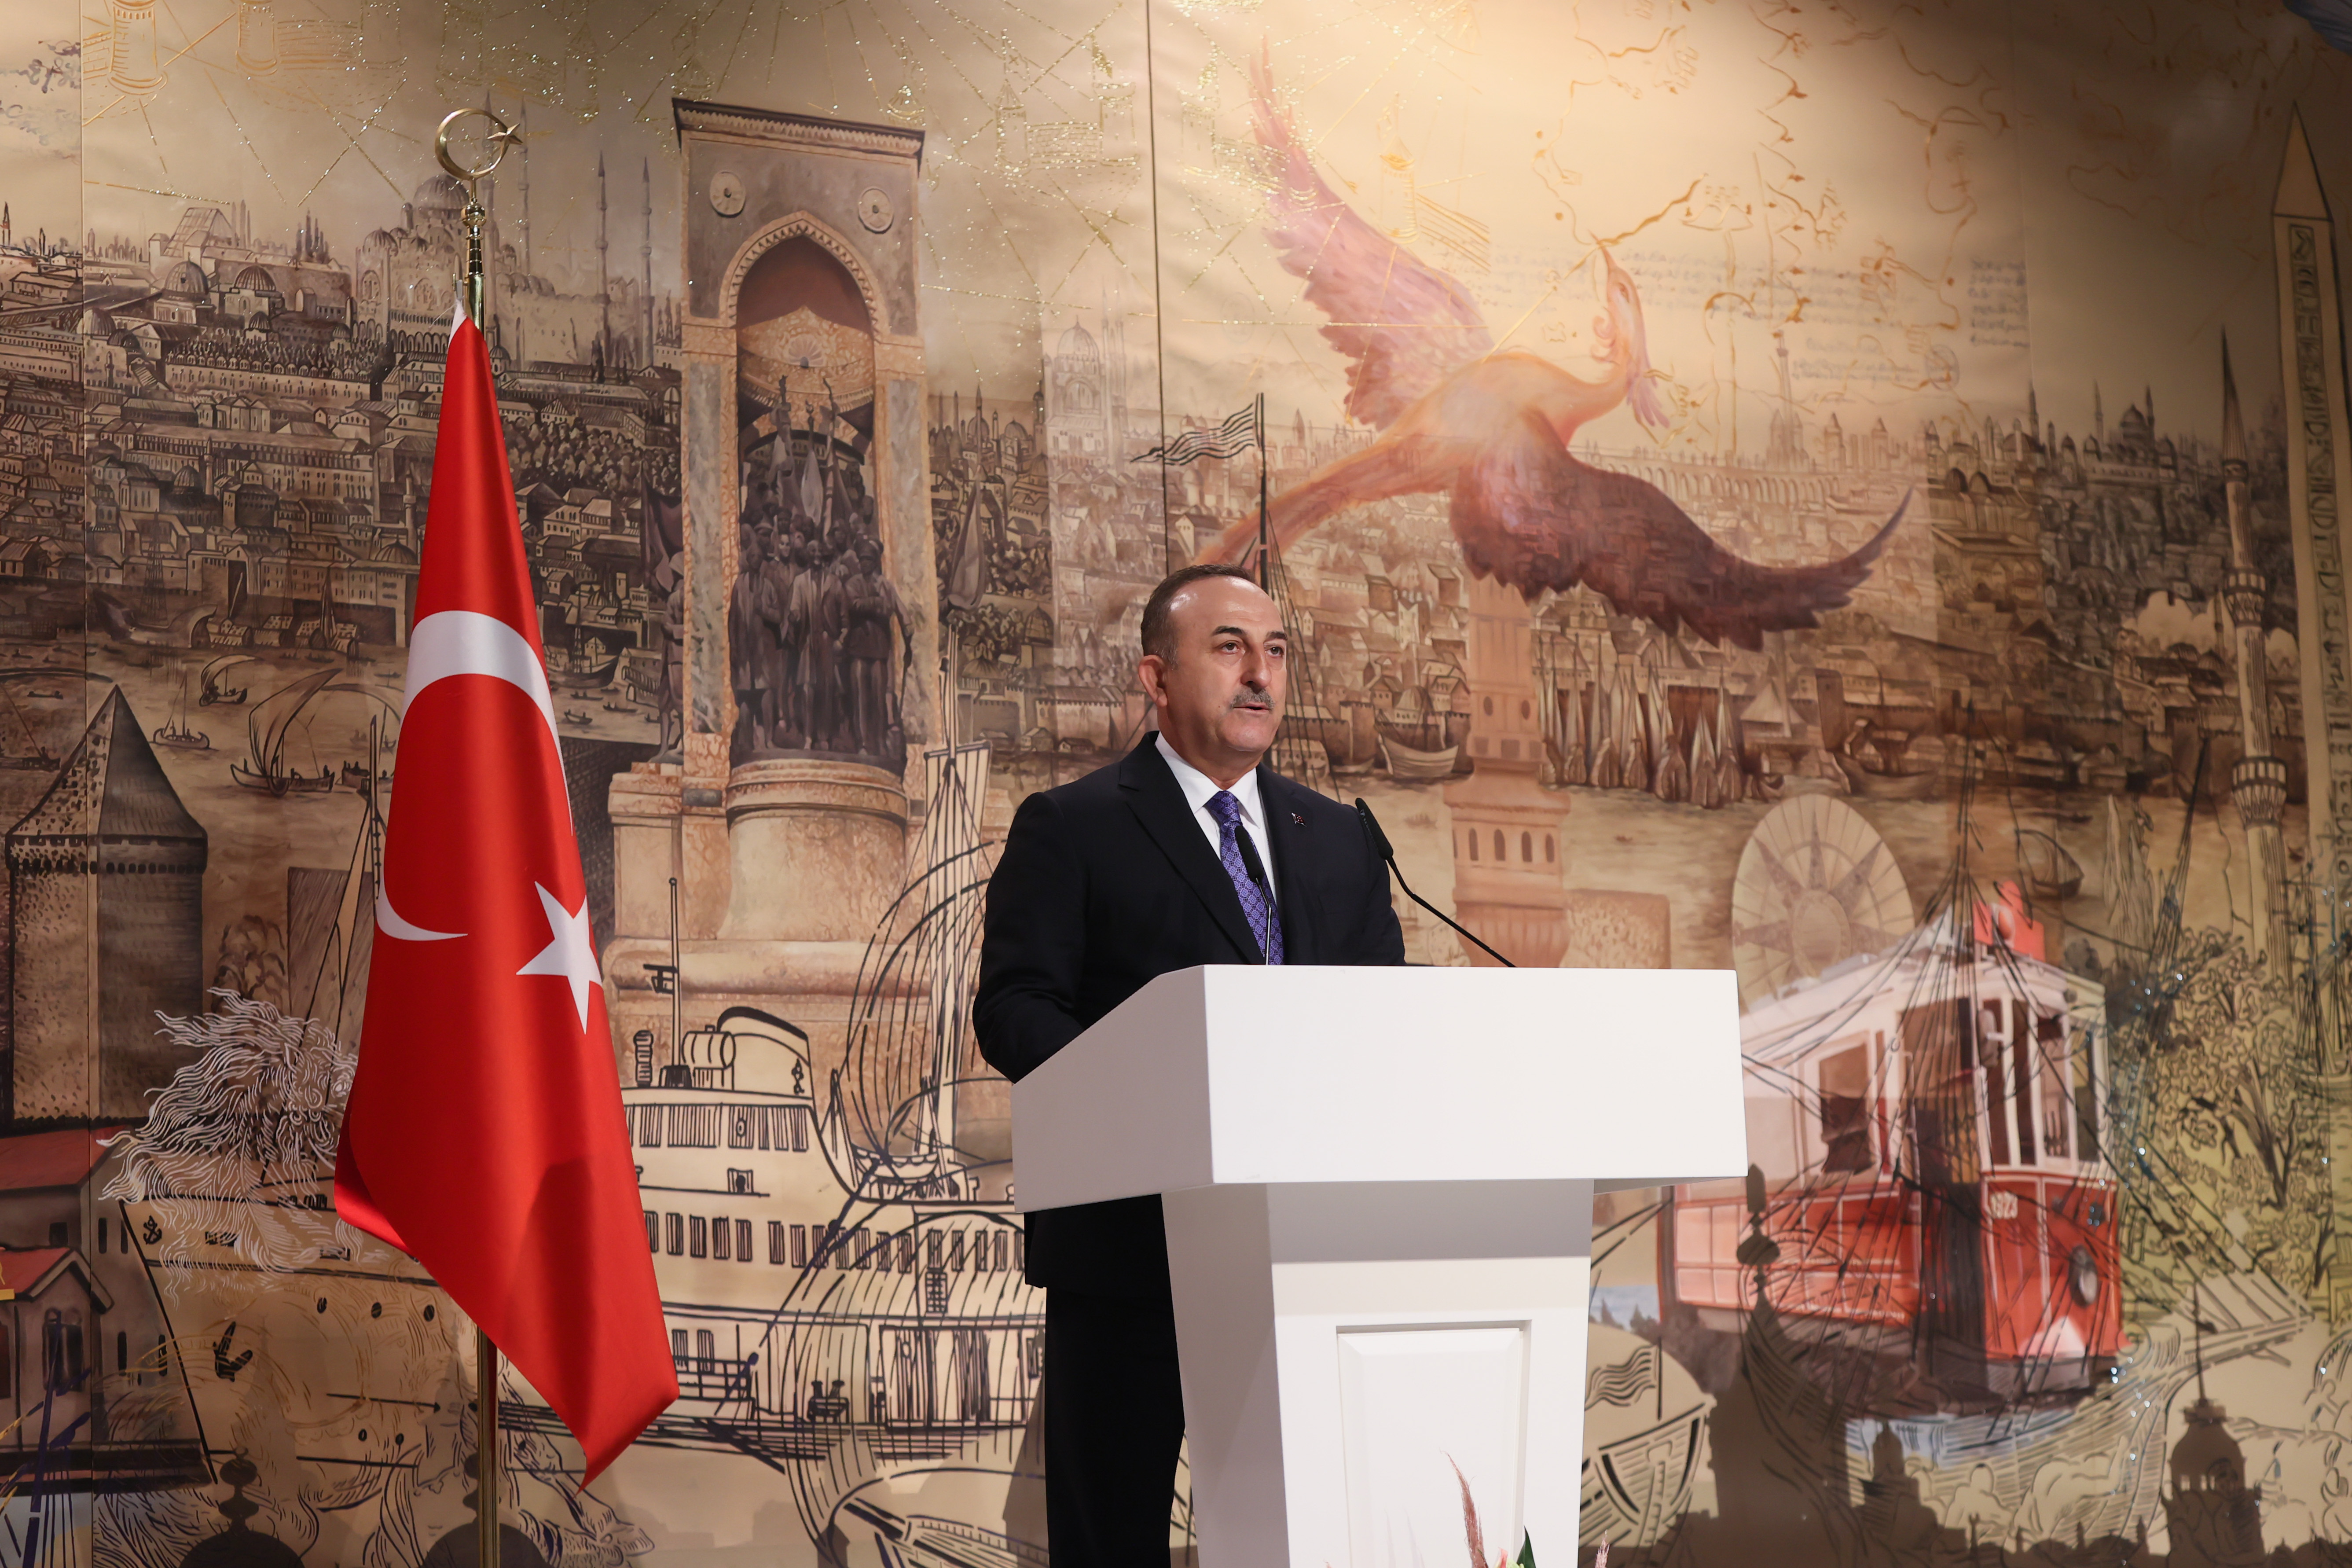 Turkish Foreign Minister Mevlut Cavusoglu holds a press conference after the peace talks between delegations from Russia and Ukraine at Dolmabahce Presidential Office in Istanbul, Turkey, on March 29.